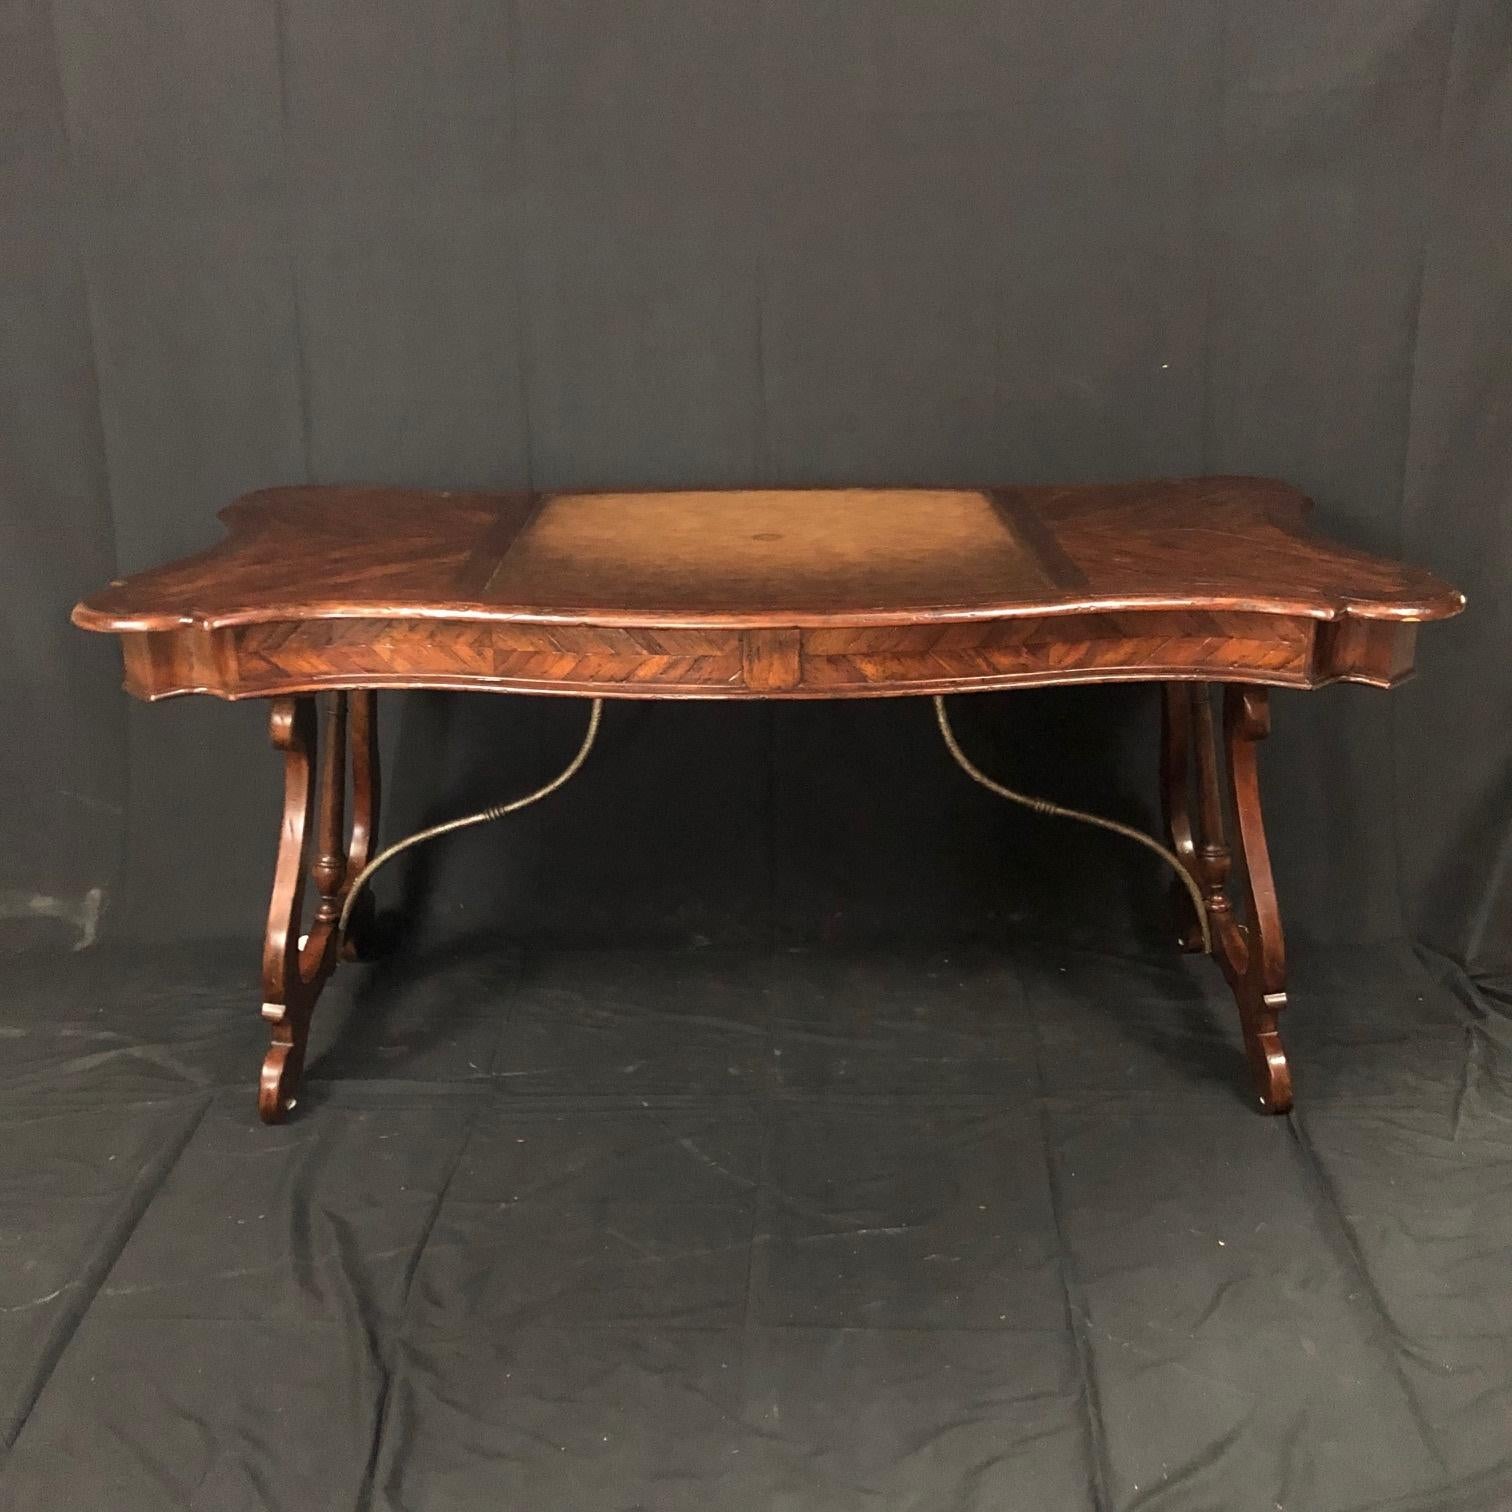 An antiqued mahogany writing table, desk or bureau plat having serpentine parquetry planked top inset with a central burnished and hand tooled leather writing surface above two frieze drawers, on splayed lyre supports with a baluster turned central